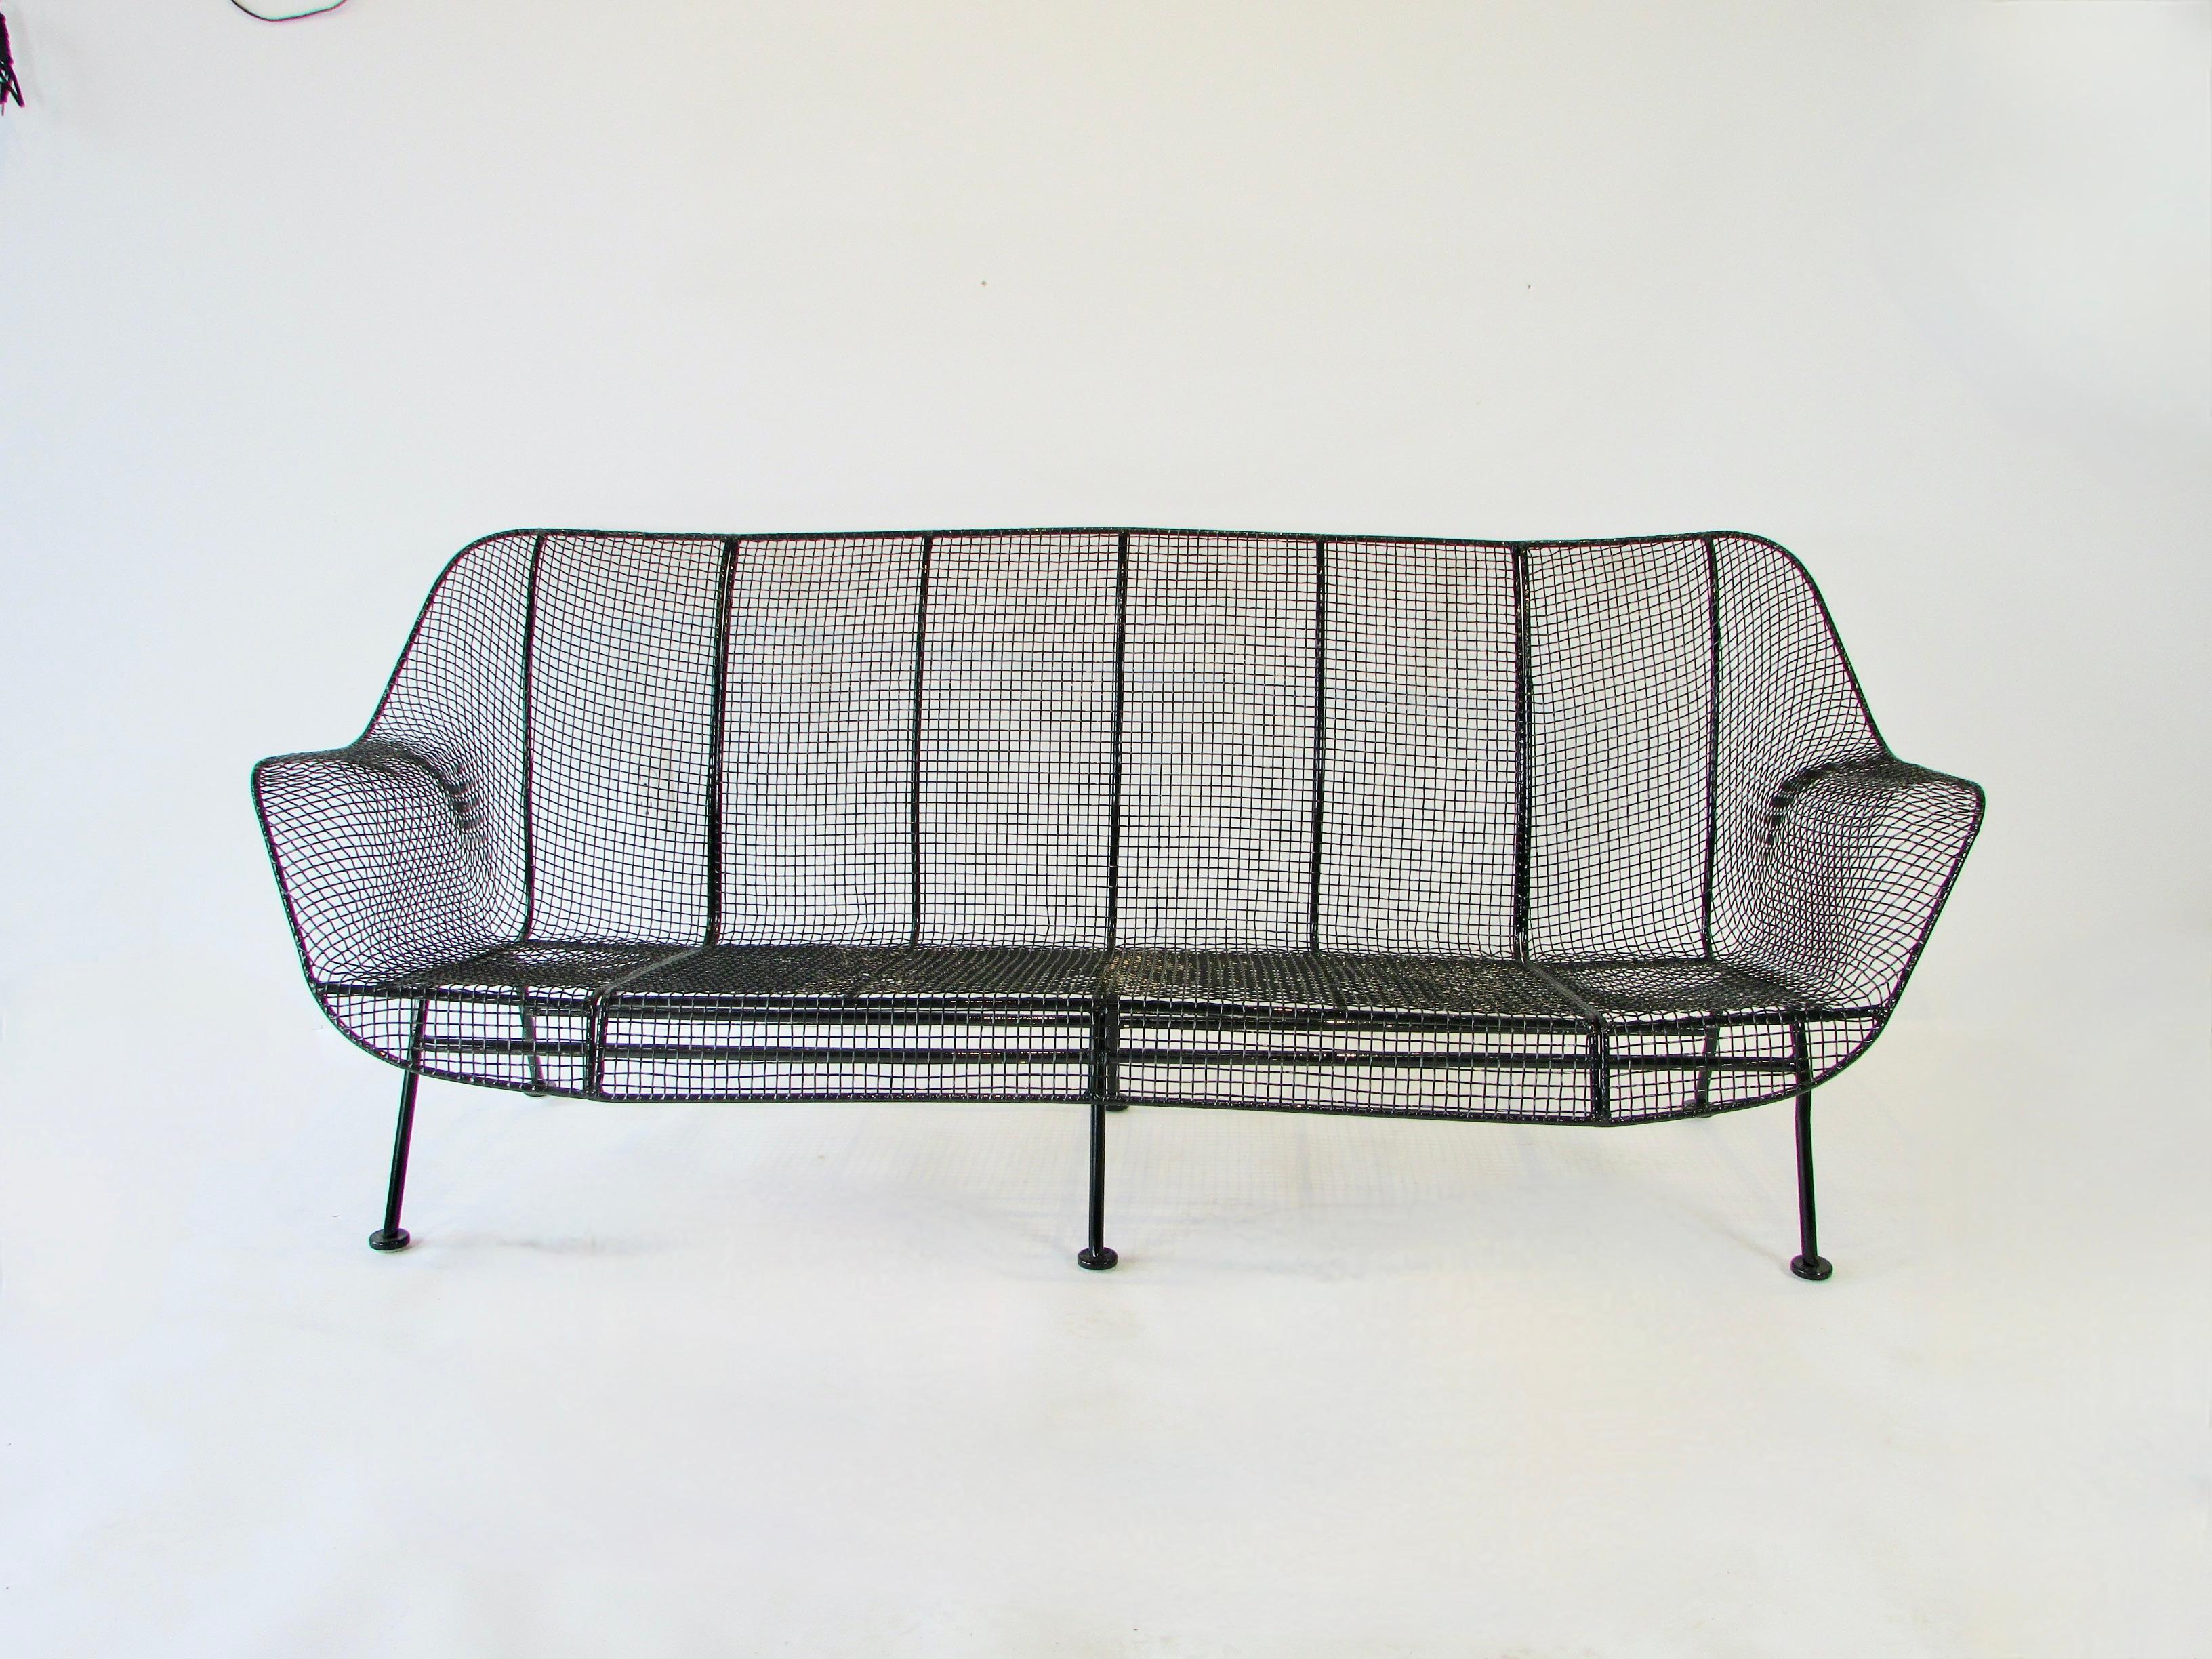 Wrought iron with steel mesh couch by Woodard. From the sculpture line fresh modernist design. Maybe the best available, finished in gloss black powder coat with new glides added.